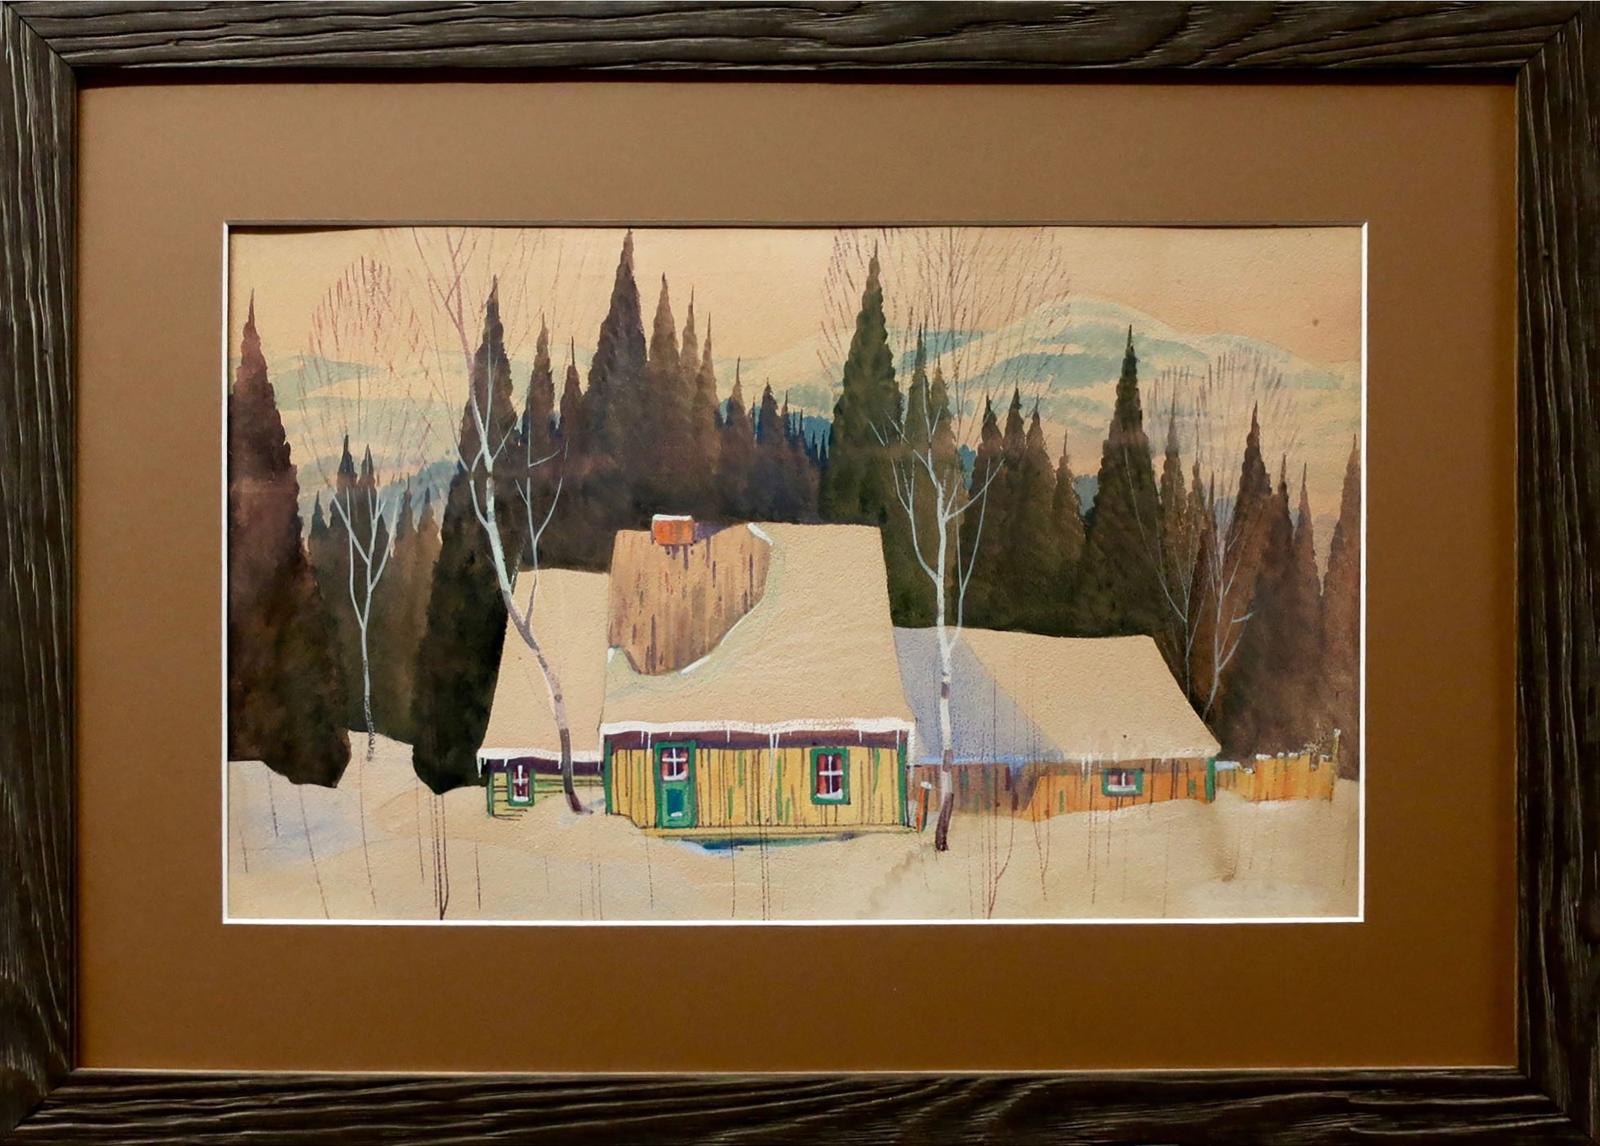 Graham Norble Norwell (1901-1967) - Snow Covered Cottage - Laurentians